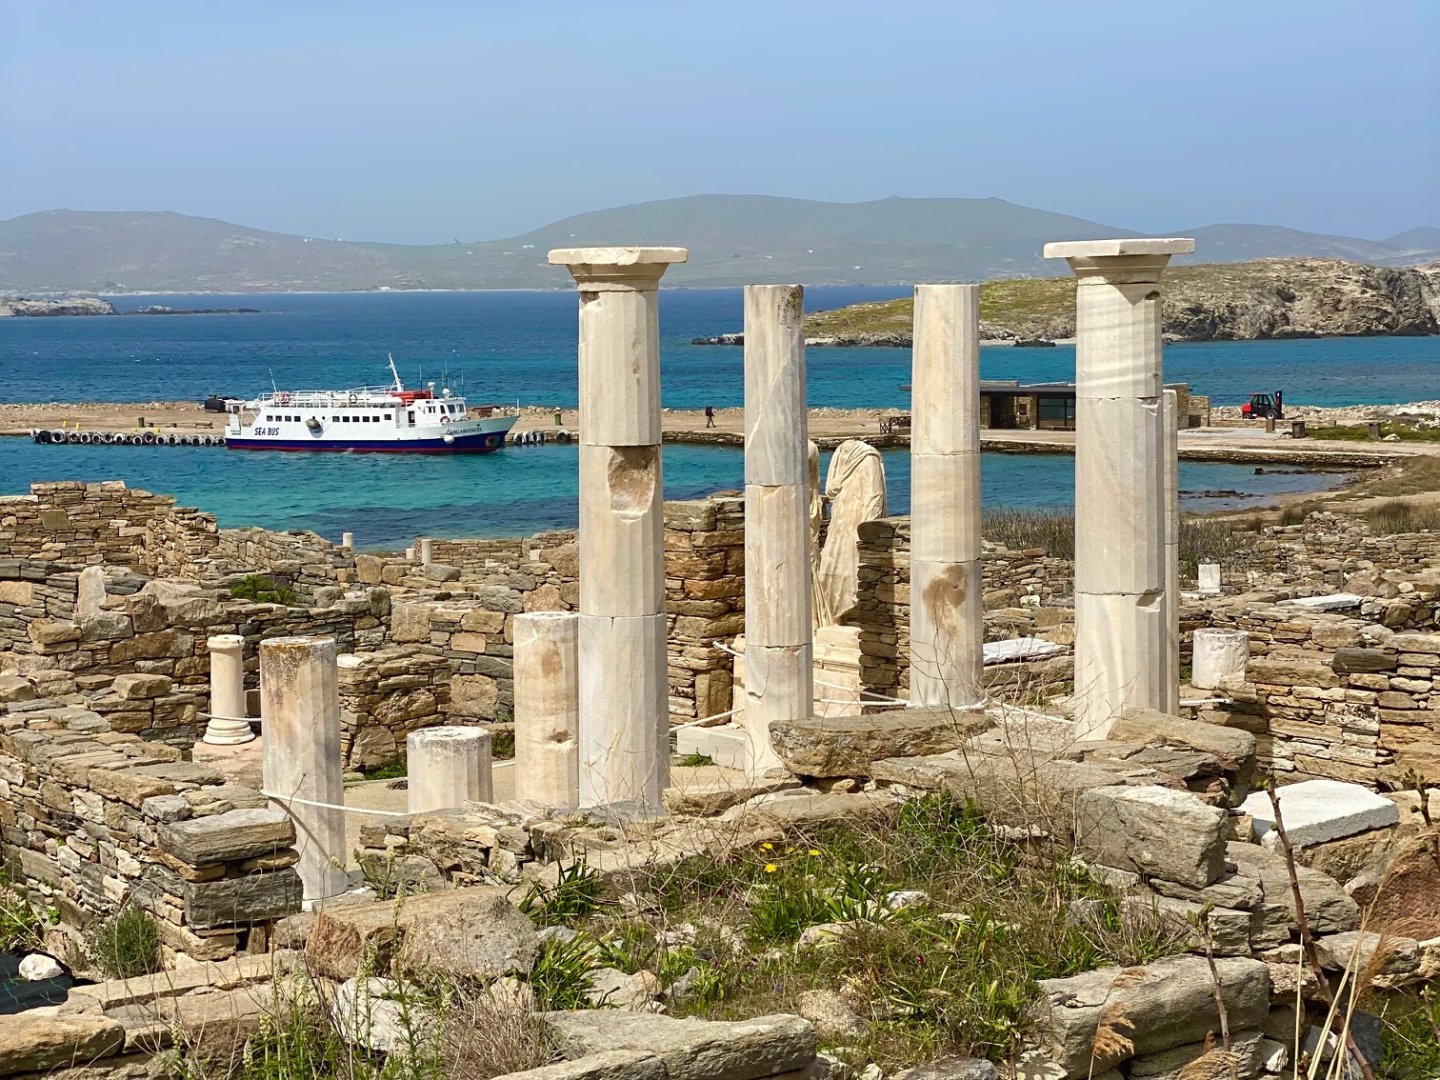 Marble pillars and statues with the sea and Delos tour boat behind